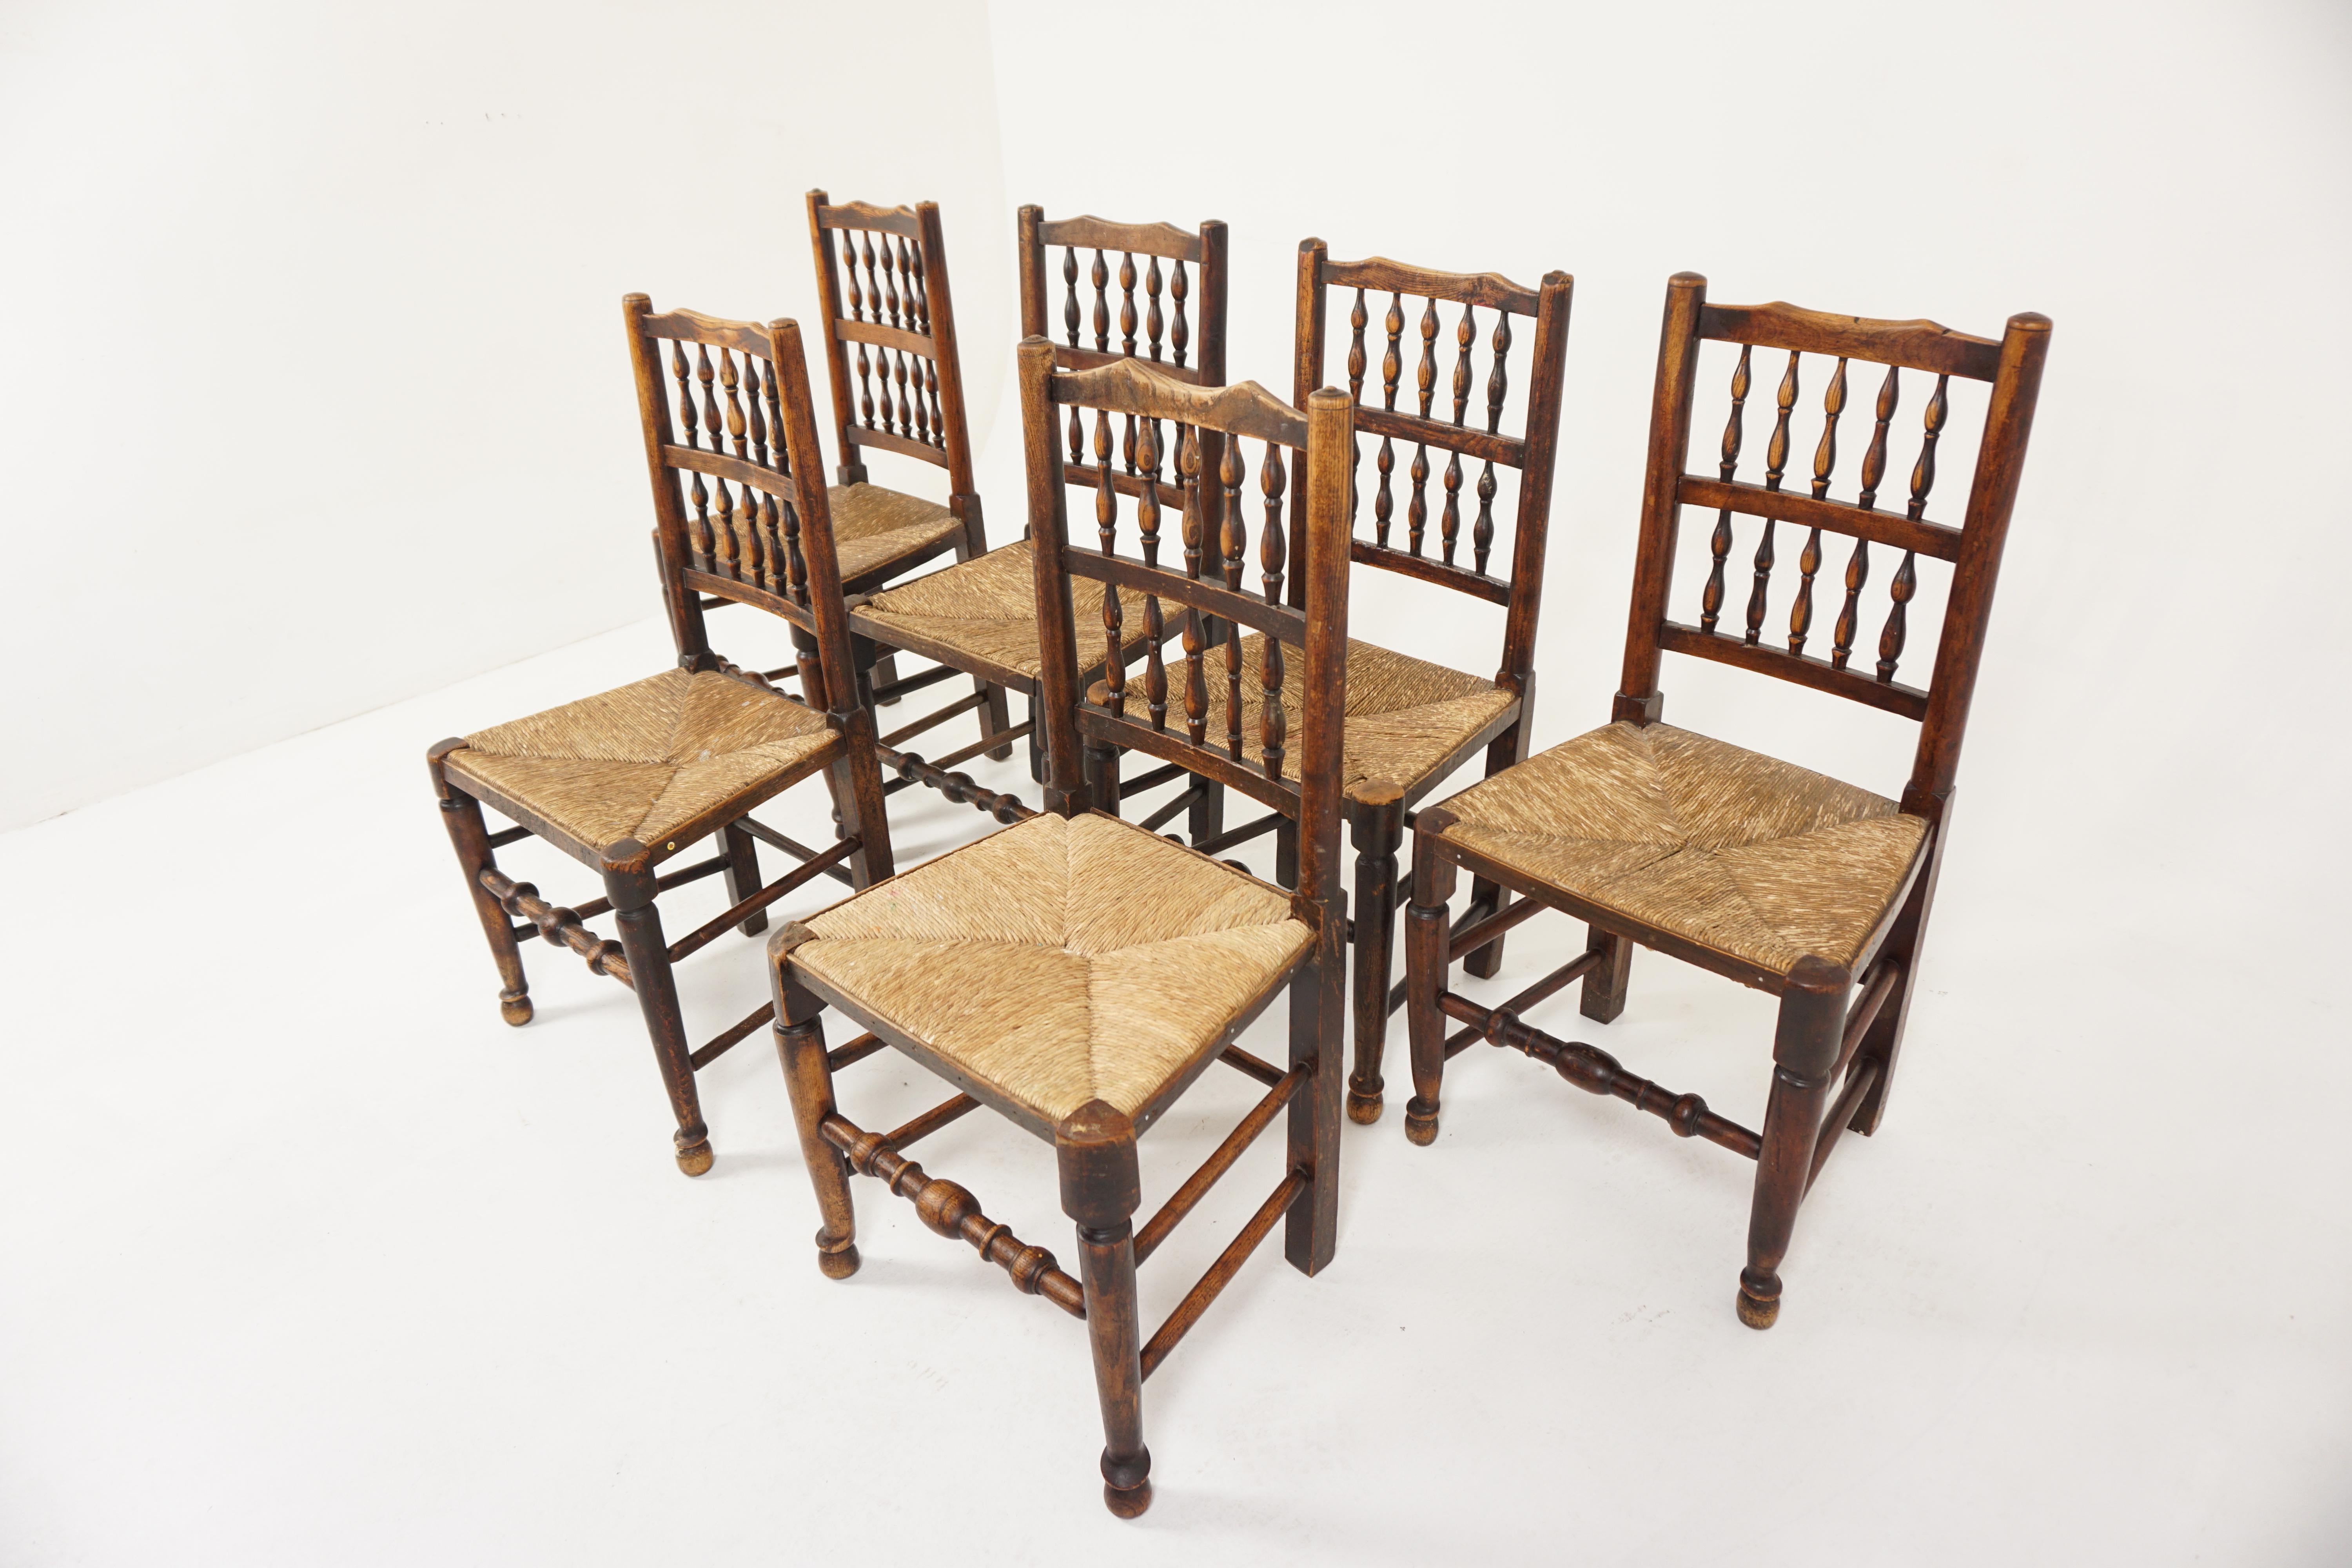 6 antique Victorian rush seated Country chairs, Lancashire England 1890, H572

England 1890
Solid Elm
Original finish
Shaped top rail with turned spindle backs and replacement rush seats
The chairs are supported on shaped front legs with